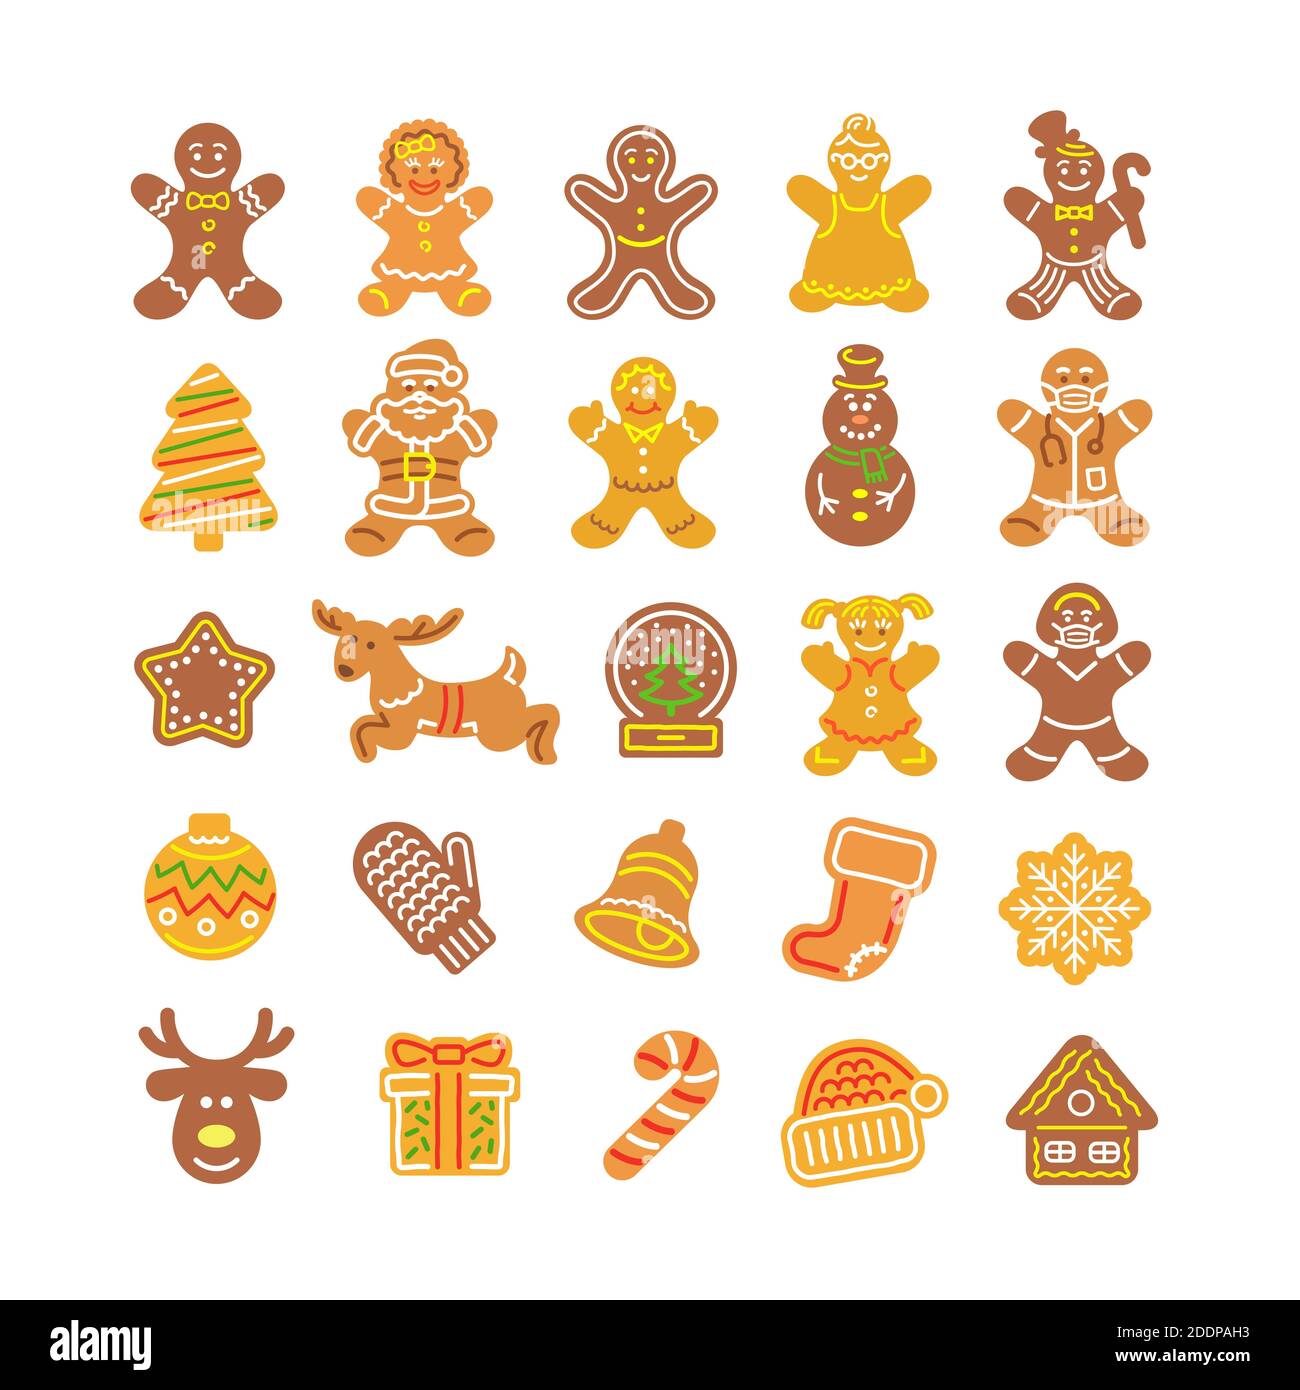 Christmas gingerbread cookies collection. Simple flat vector icons of baked gingerbread men, girl, Santa Claus, deer, snowflake, snowman, present, mit Stock Vector